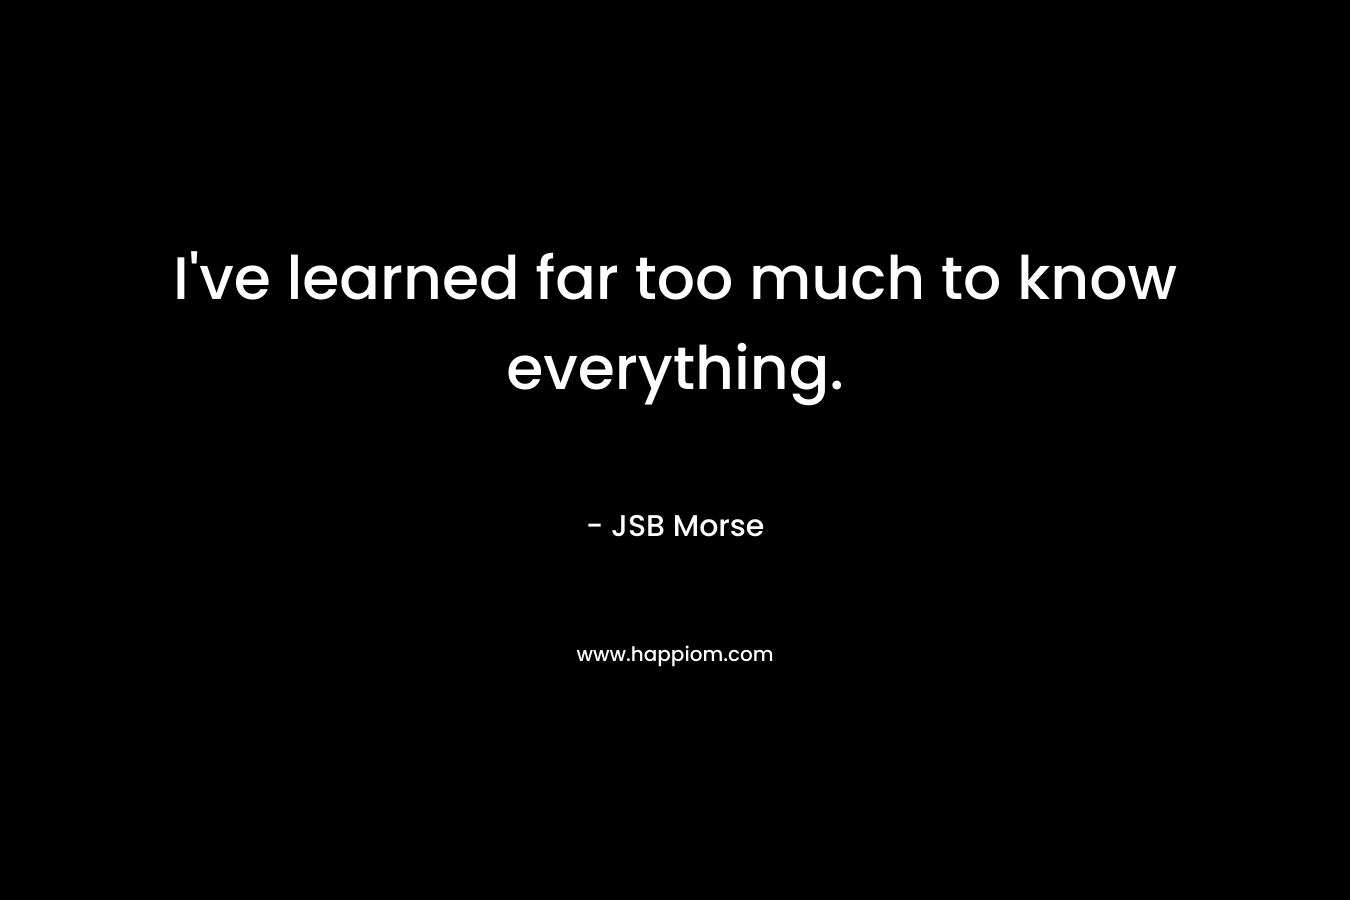 I've learned far too much to know everything.